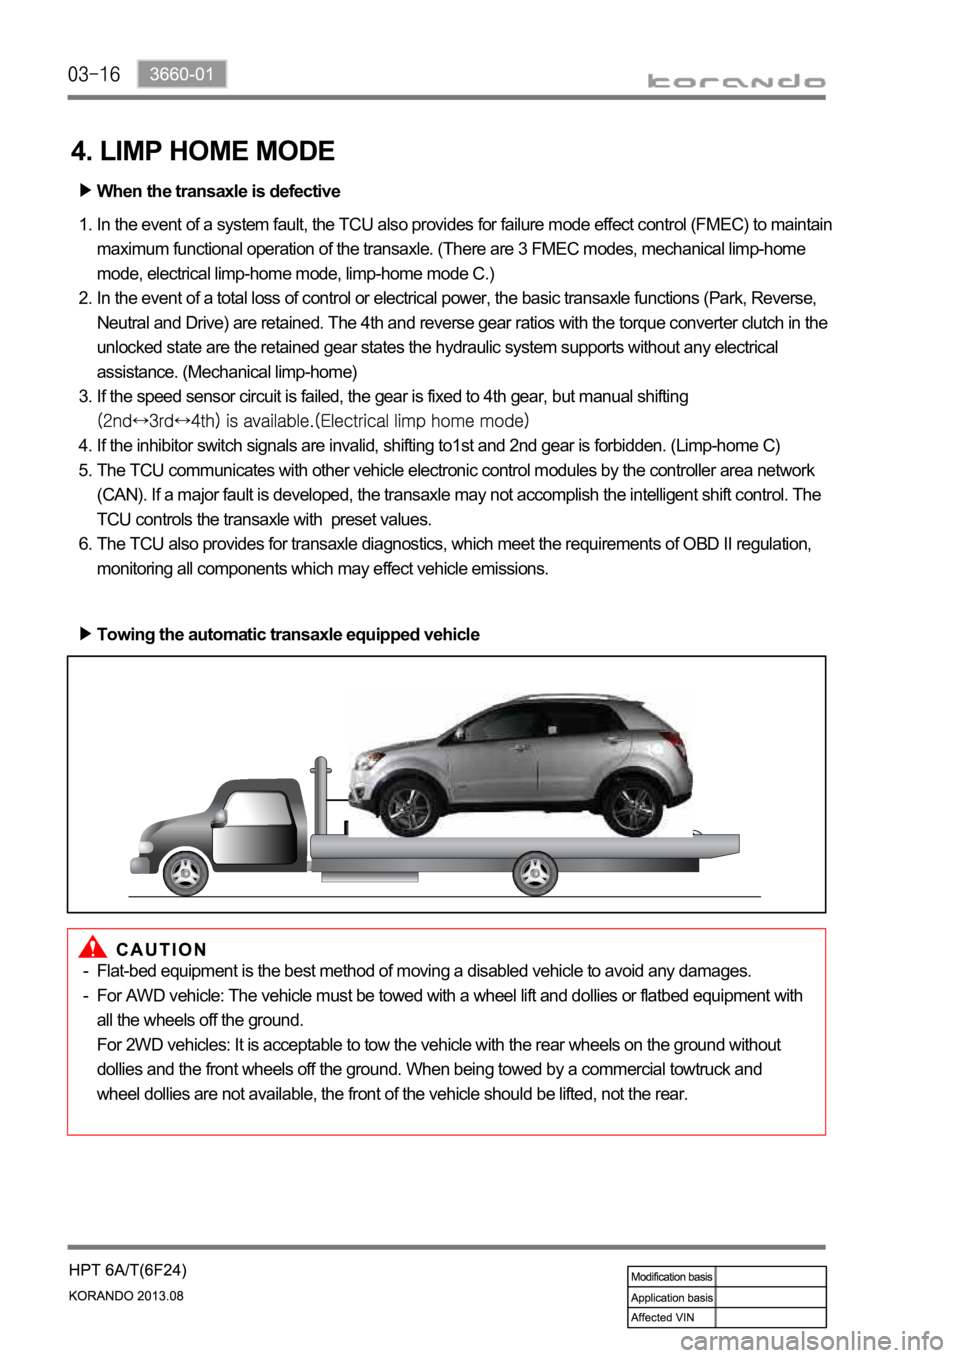 SSANGYONG KORANDO 2013  Service Manual 4. LIMP HOME MODE
When the transaxle is defective
In the event of a system fault, the TCU also provides for failure mode effect control (FMEC) to maintain 
maximum functional operation of the transaxl